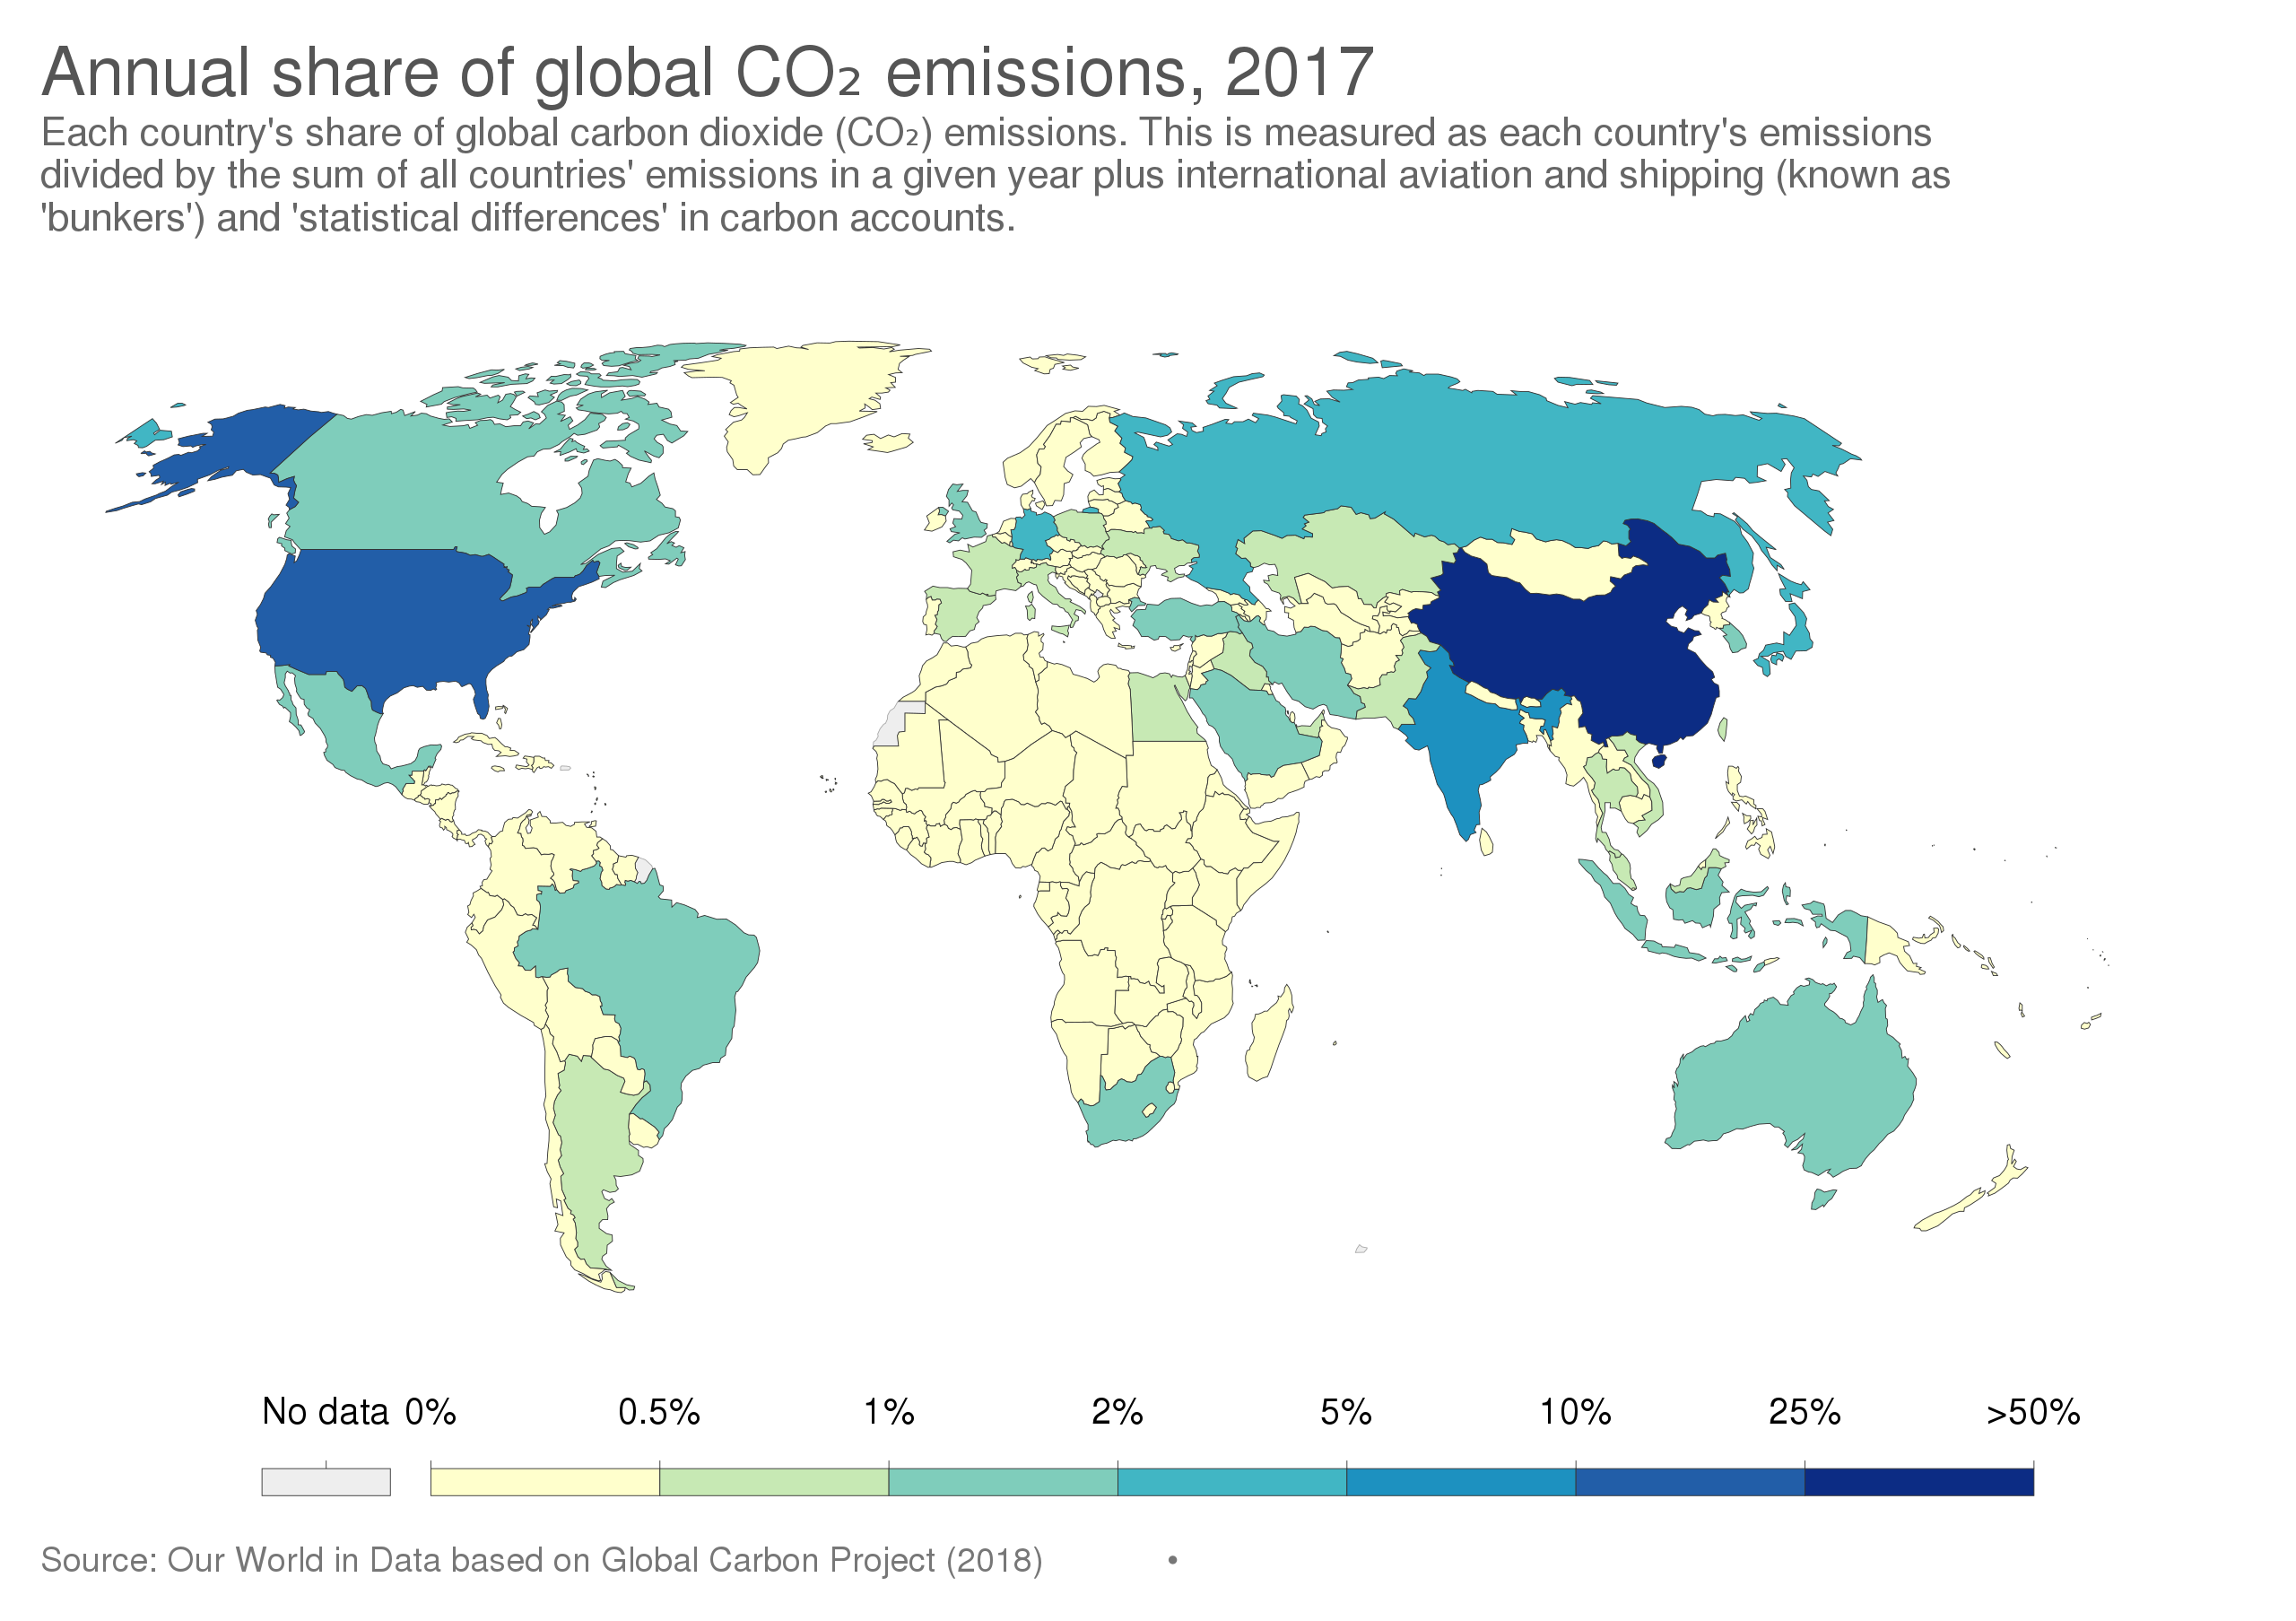 Each Country's Share of CO2 Emissions